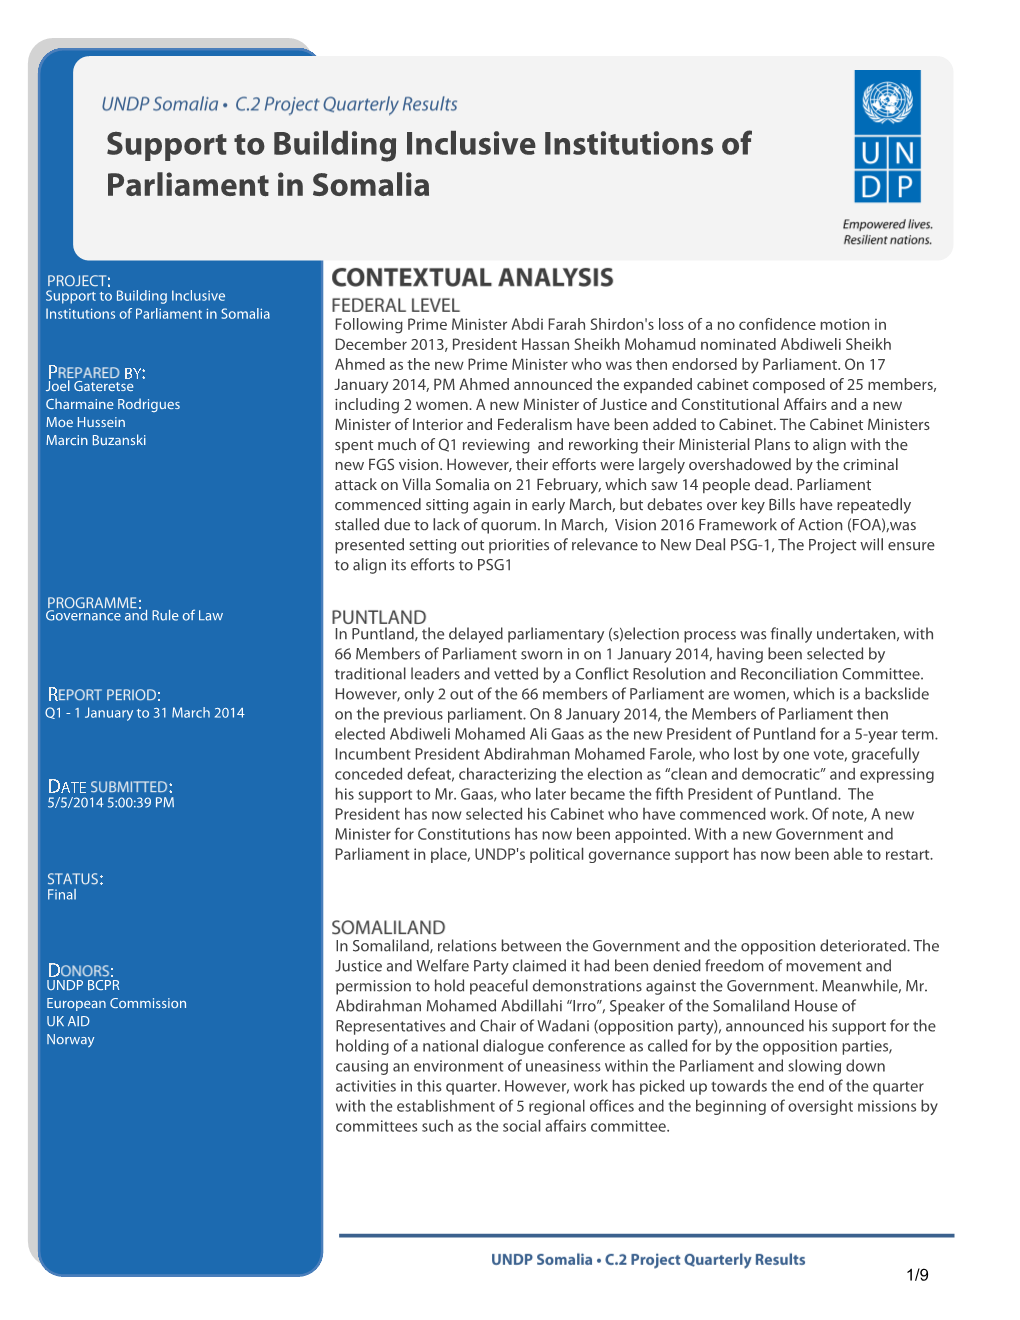 Support to Building Inclusive Institutions of Parliament in Somalia